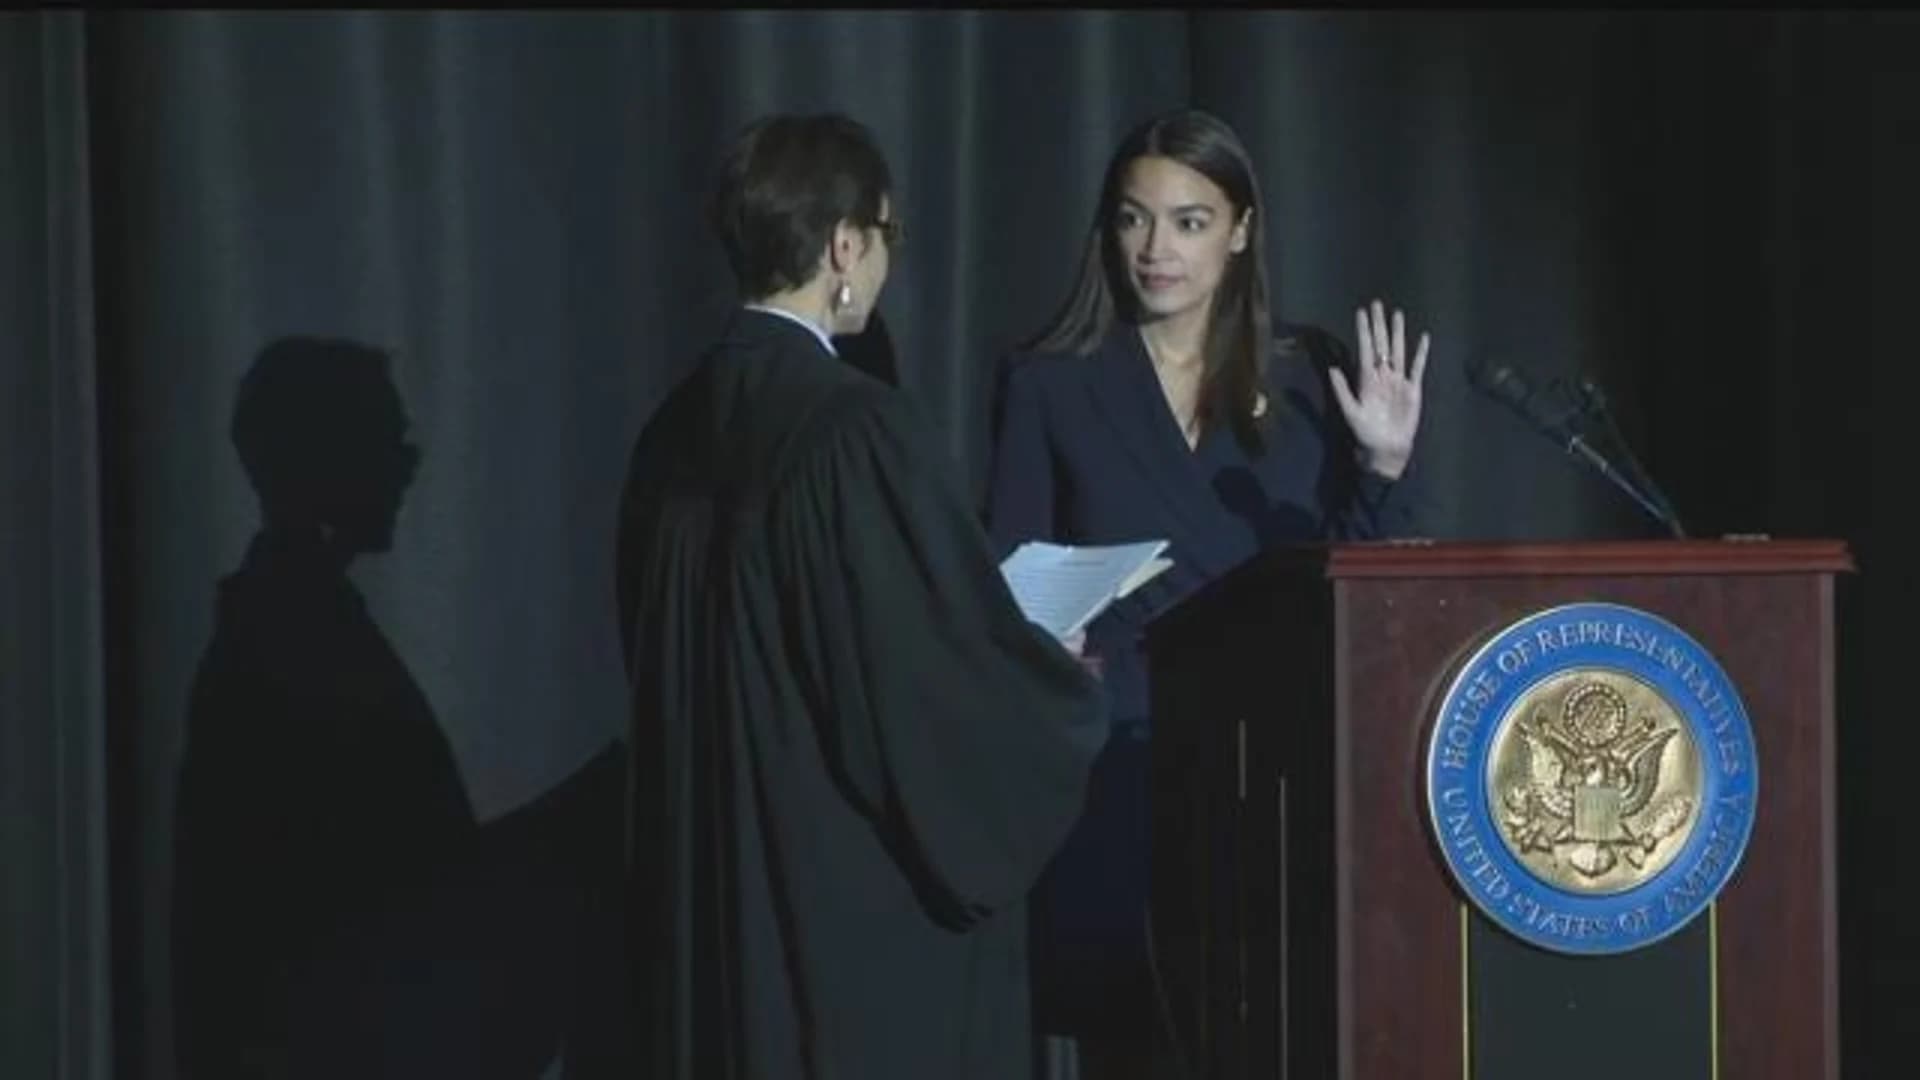 Ocasio-Cortez urges community to work with her at Bronx inauguration